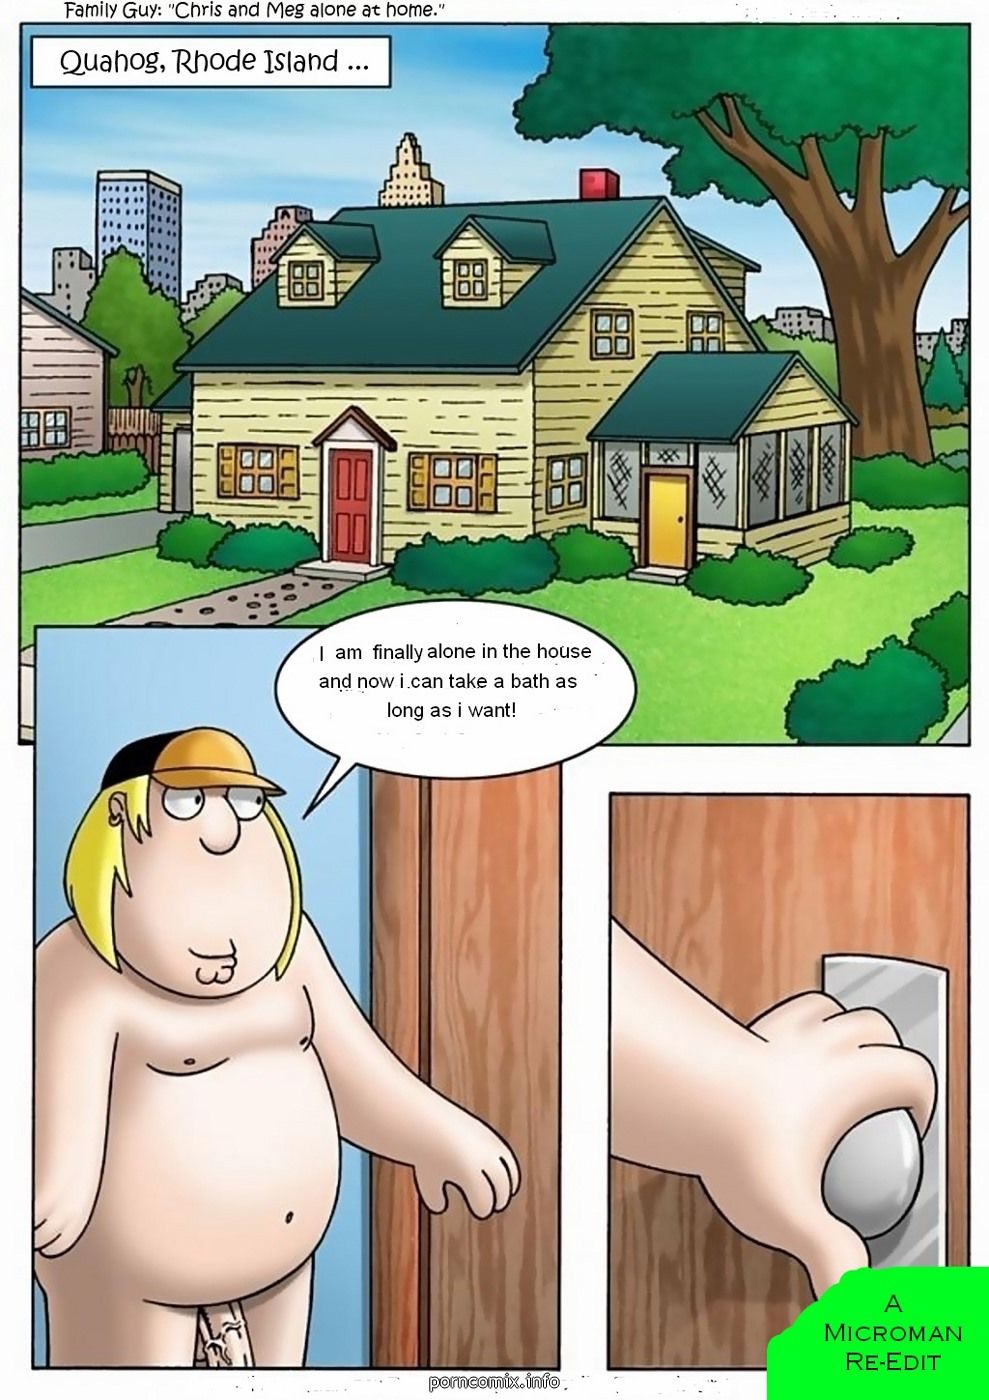 Family Guy - Chris and Meg Alone at Home page 1